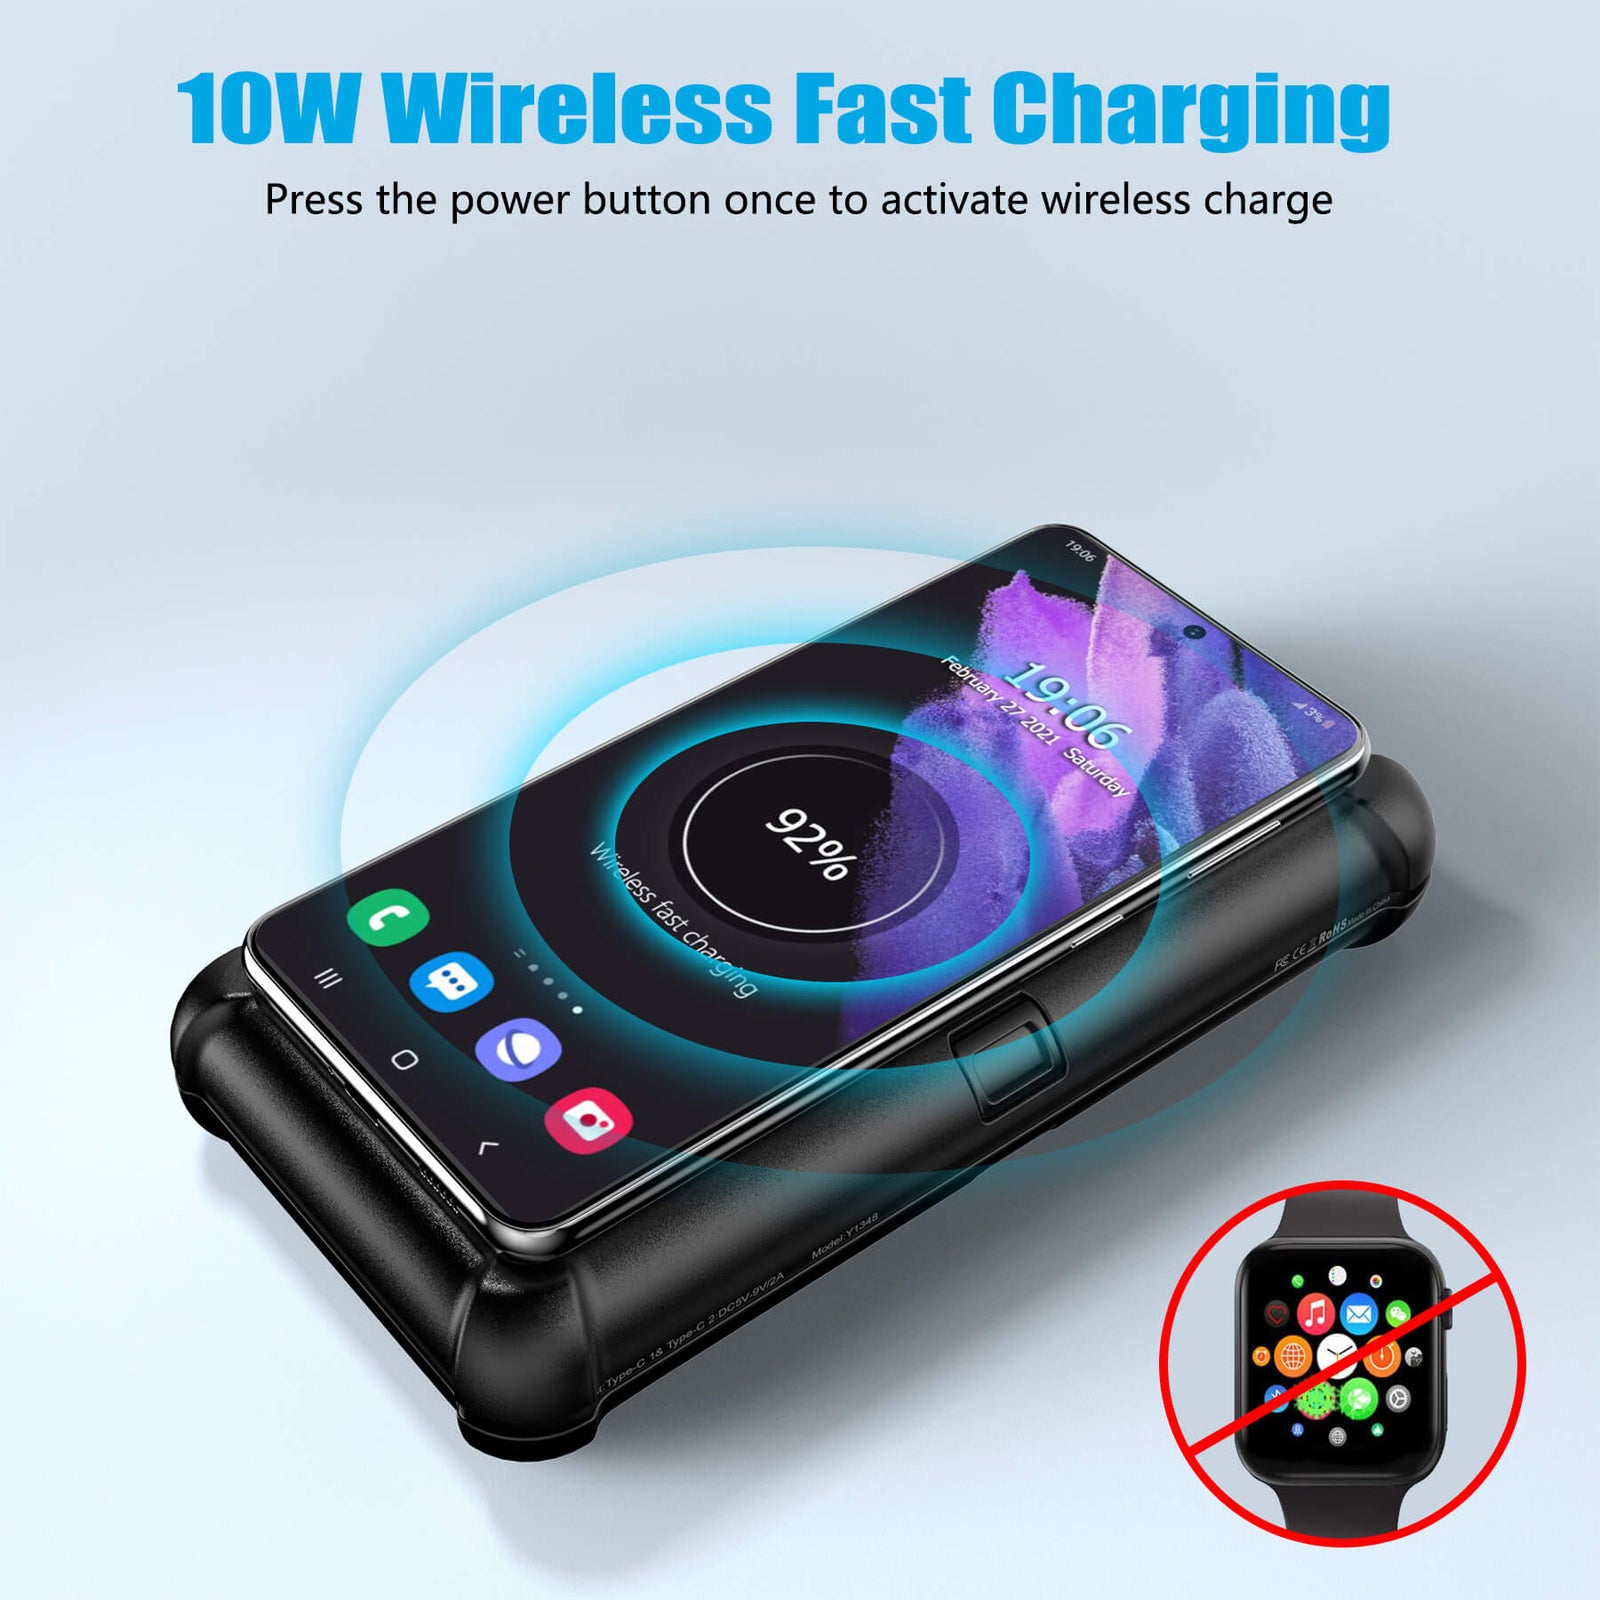 [Upgraded] ToughJuice Pro 30000mAh 22.5W PD USB C Wireless Power Bank [Shipping to US Only]